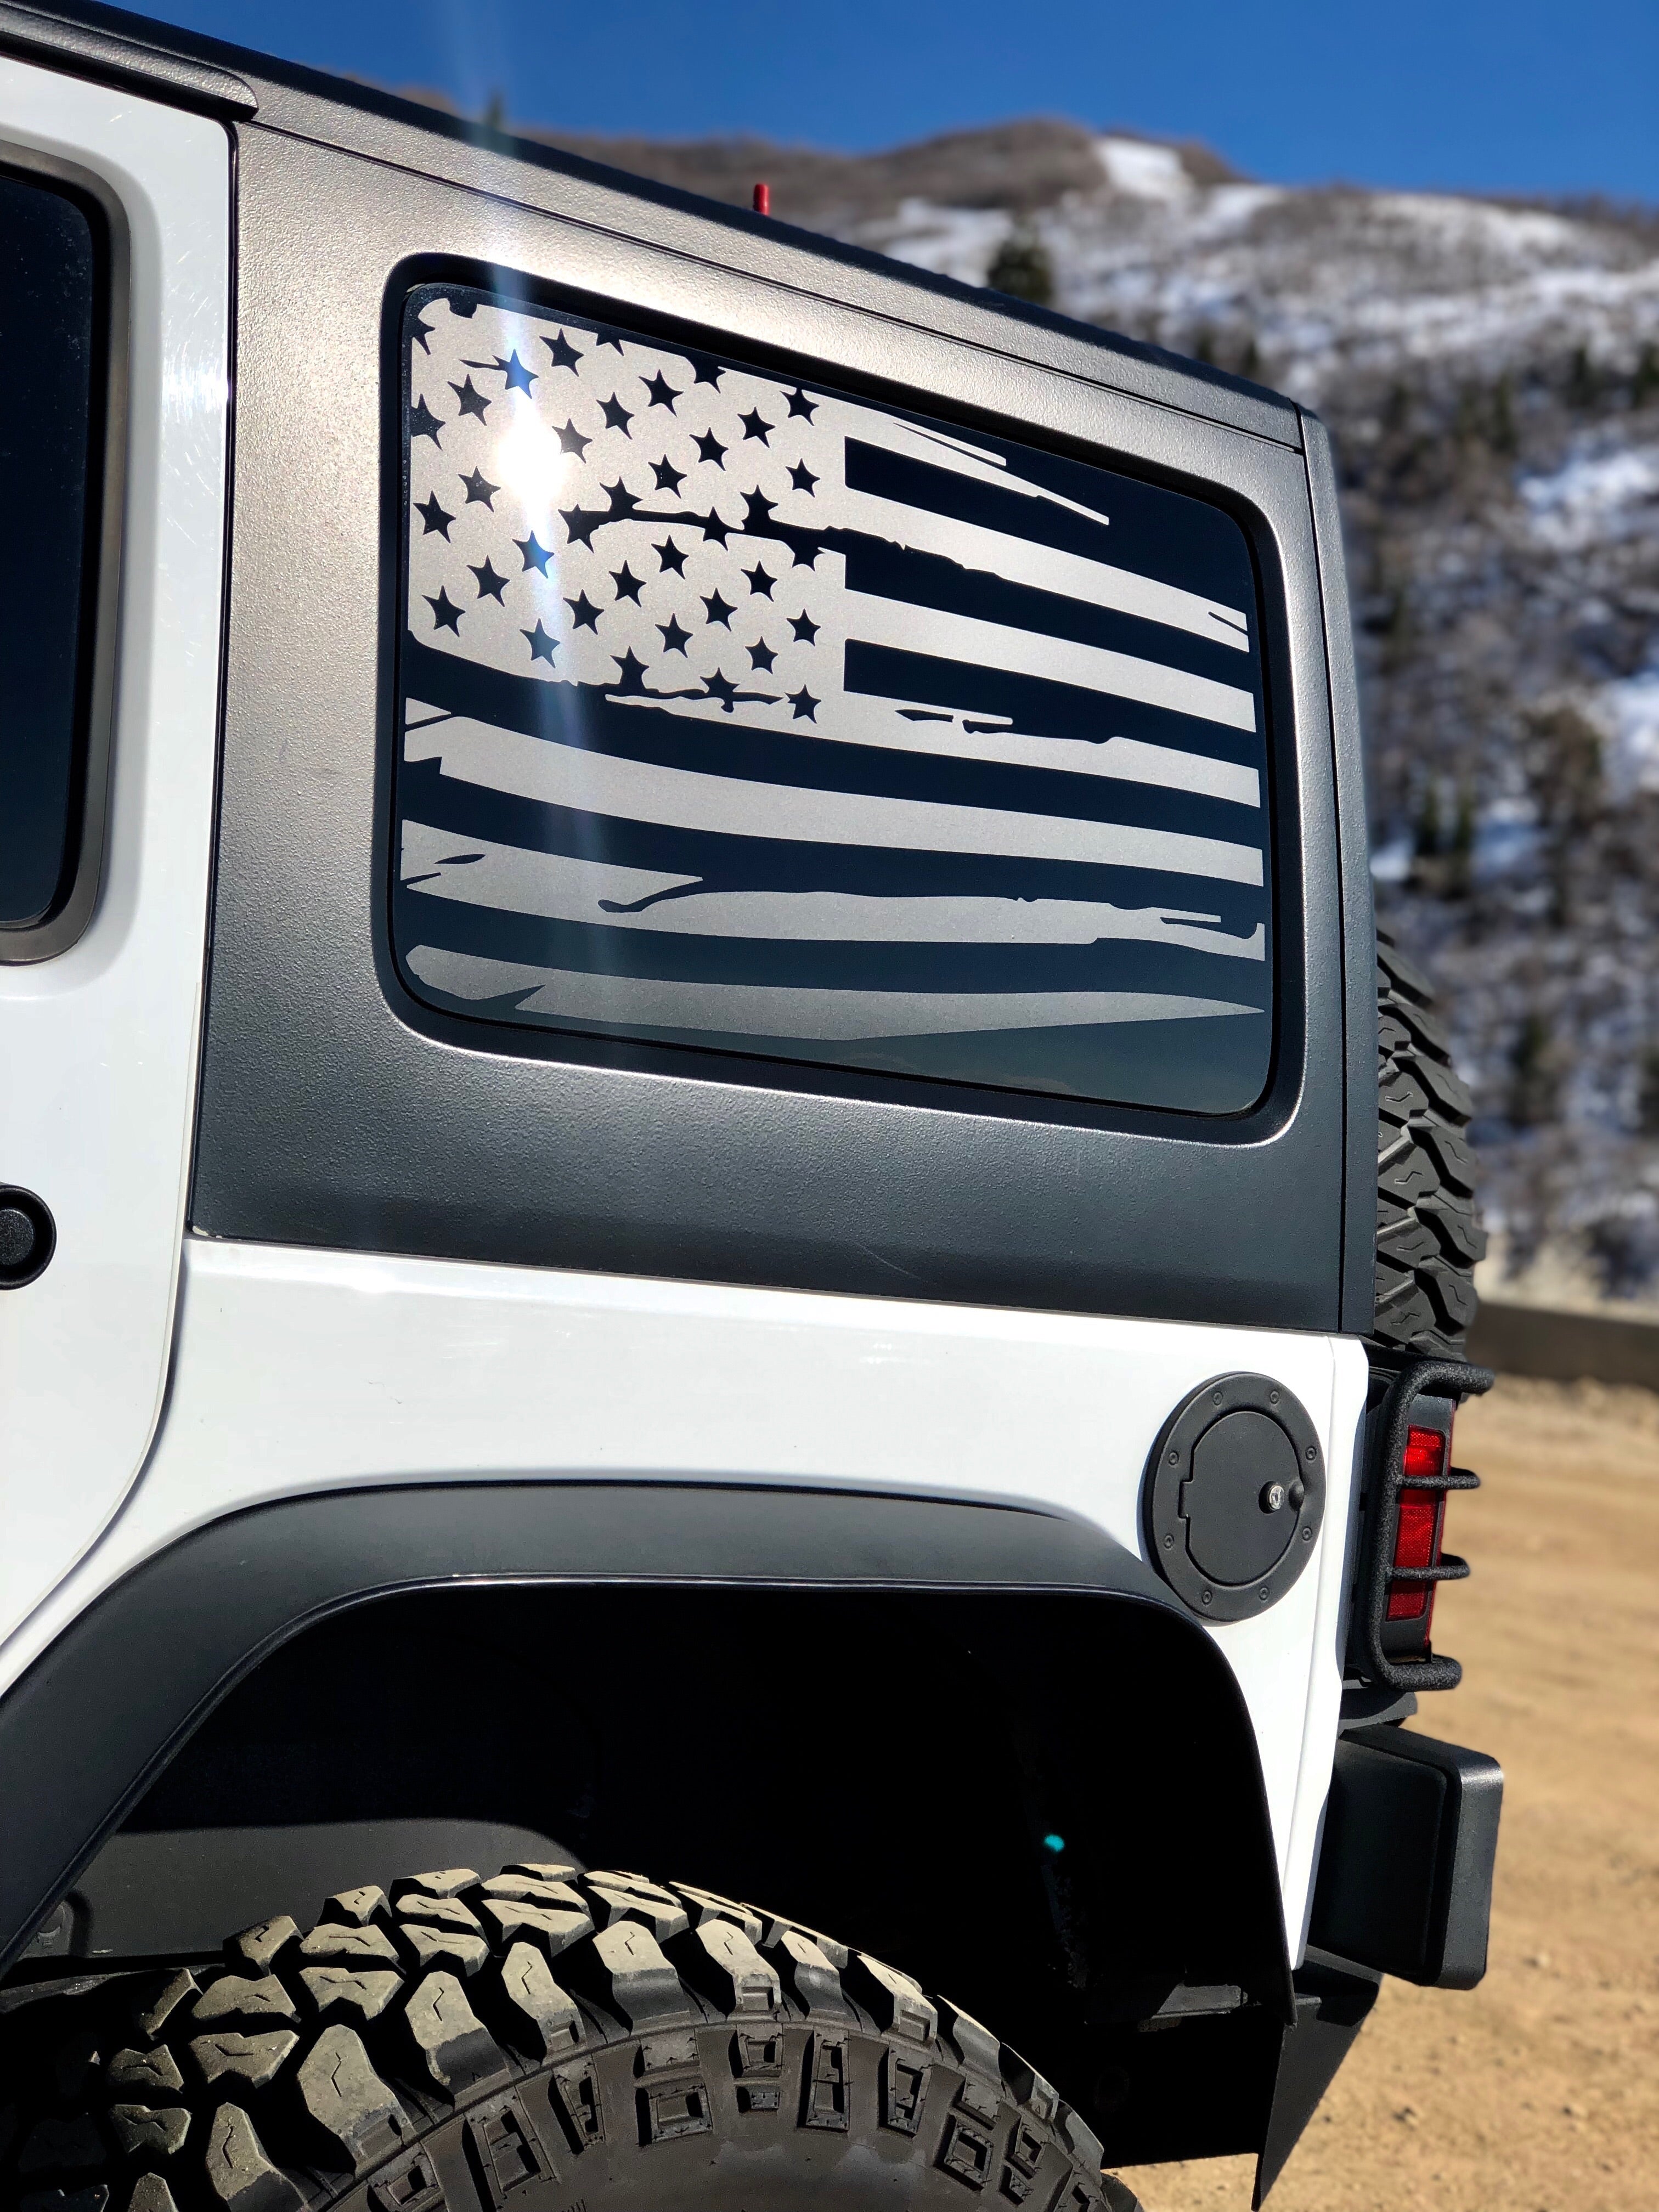 Jeep Wrangler JK American flag decal 2011-2018 (Drivers Side Only